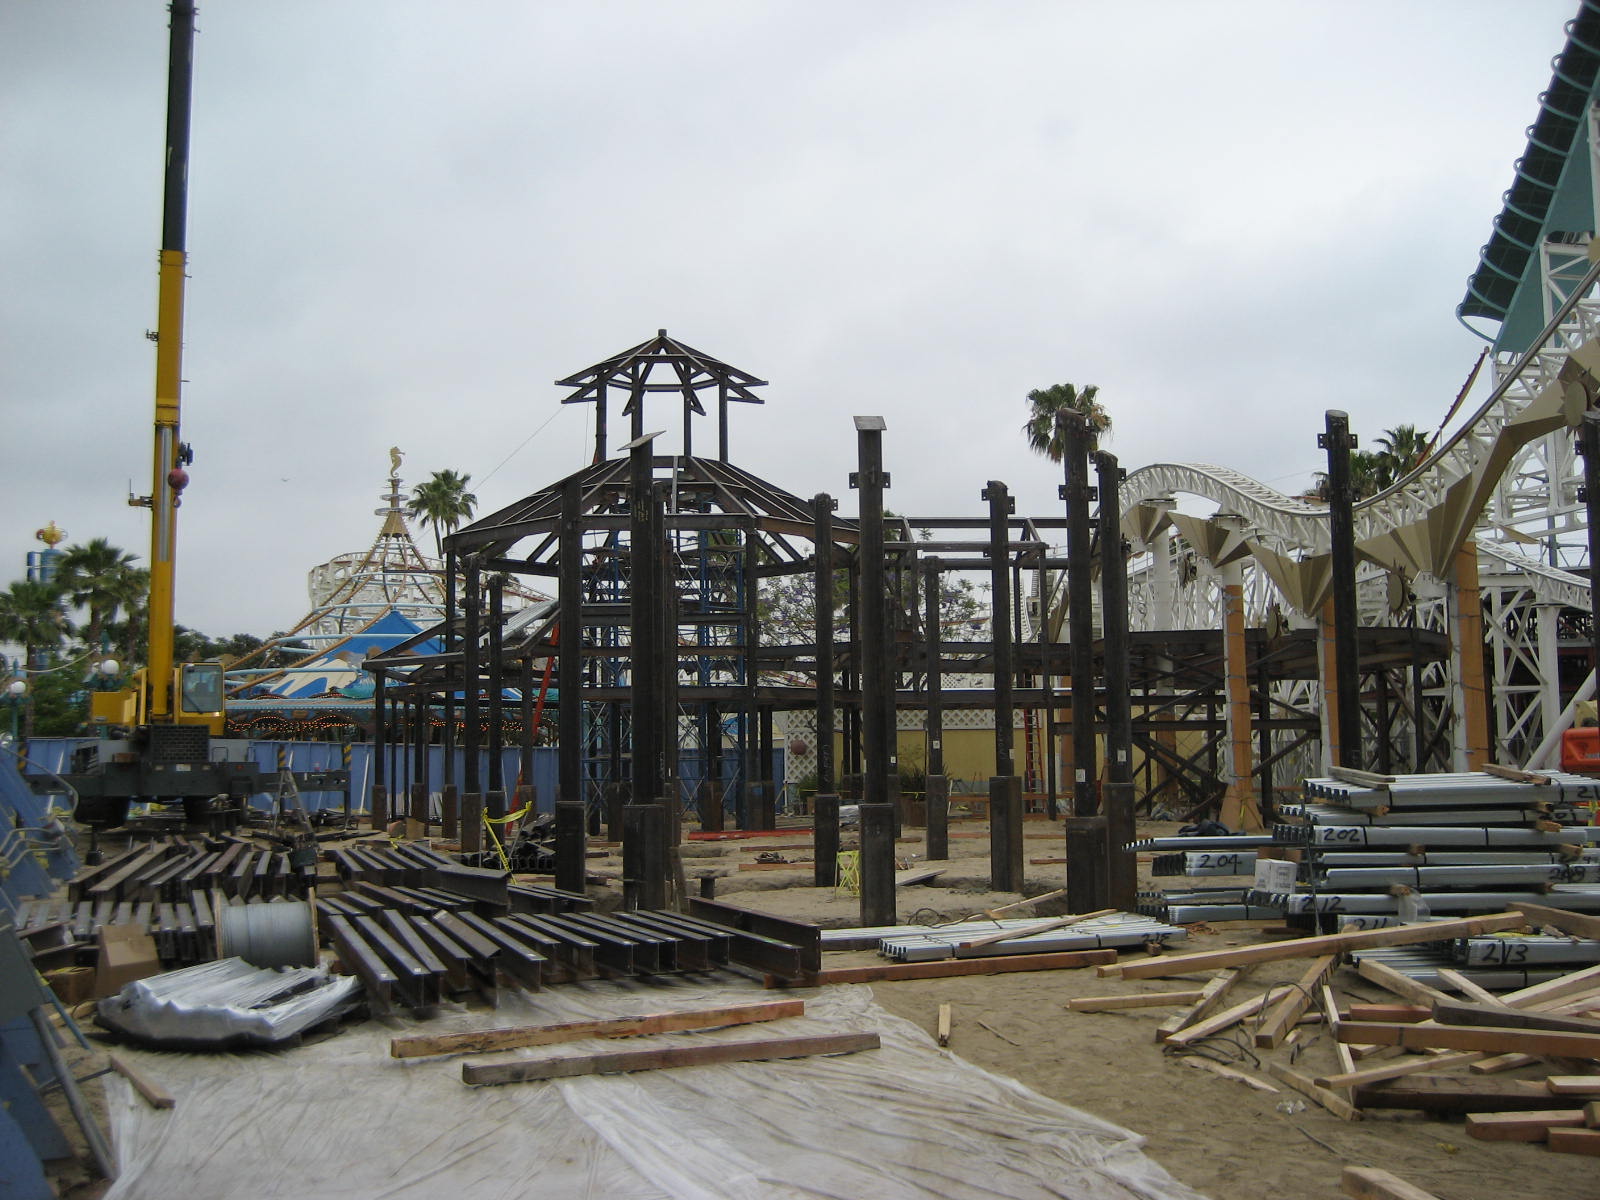 TOY-STORY-CALIFORNIA-STRUCTURE-2